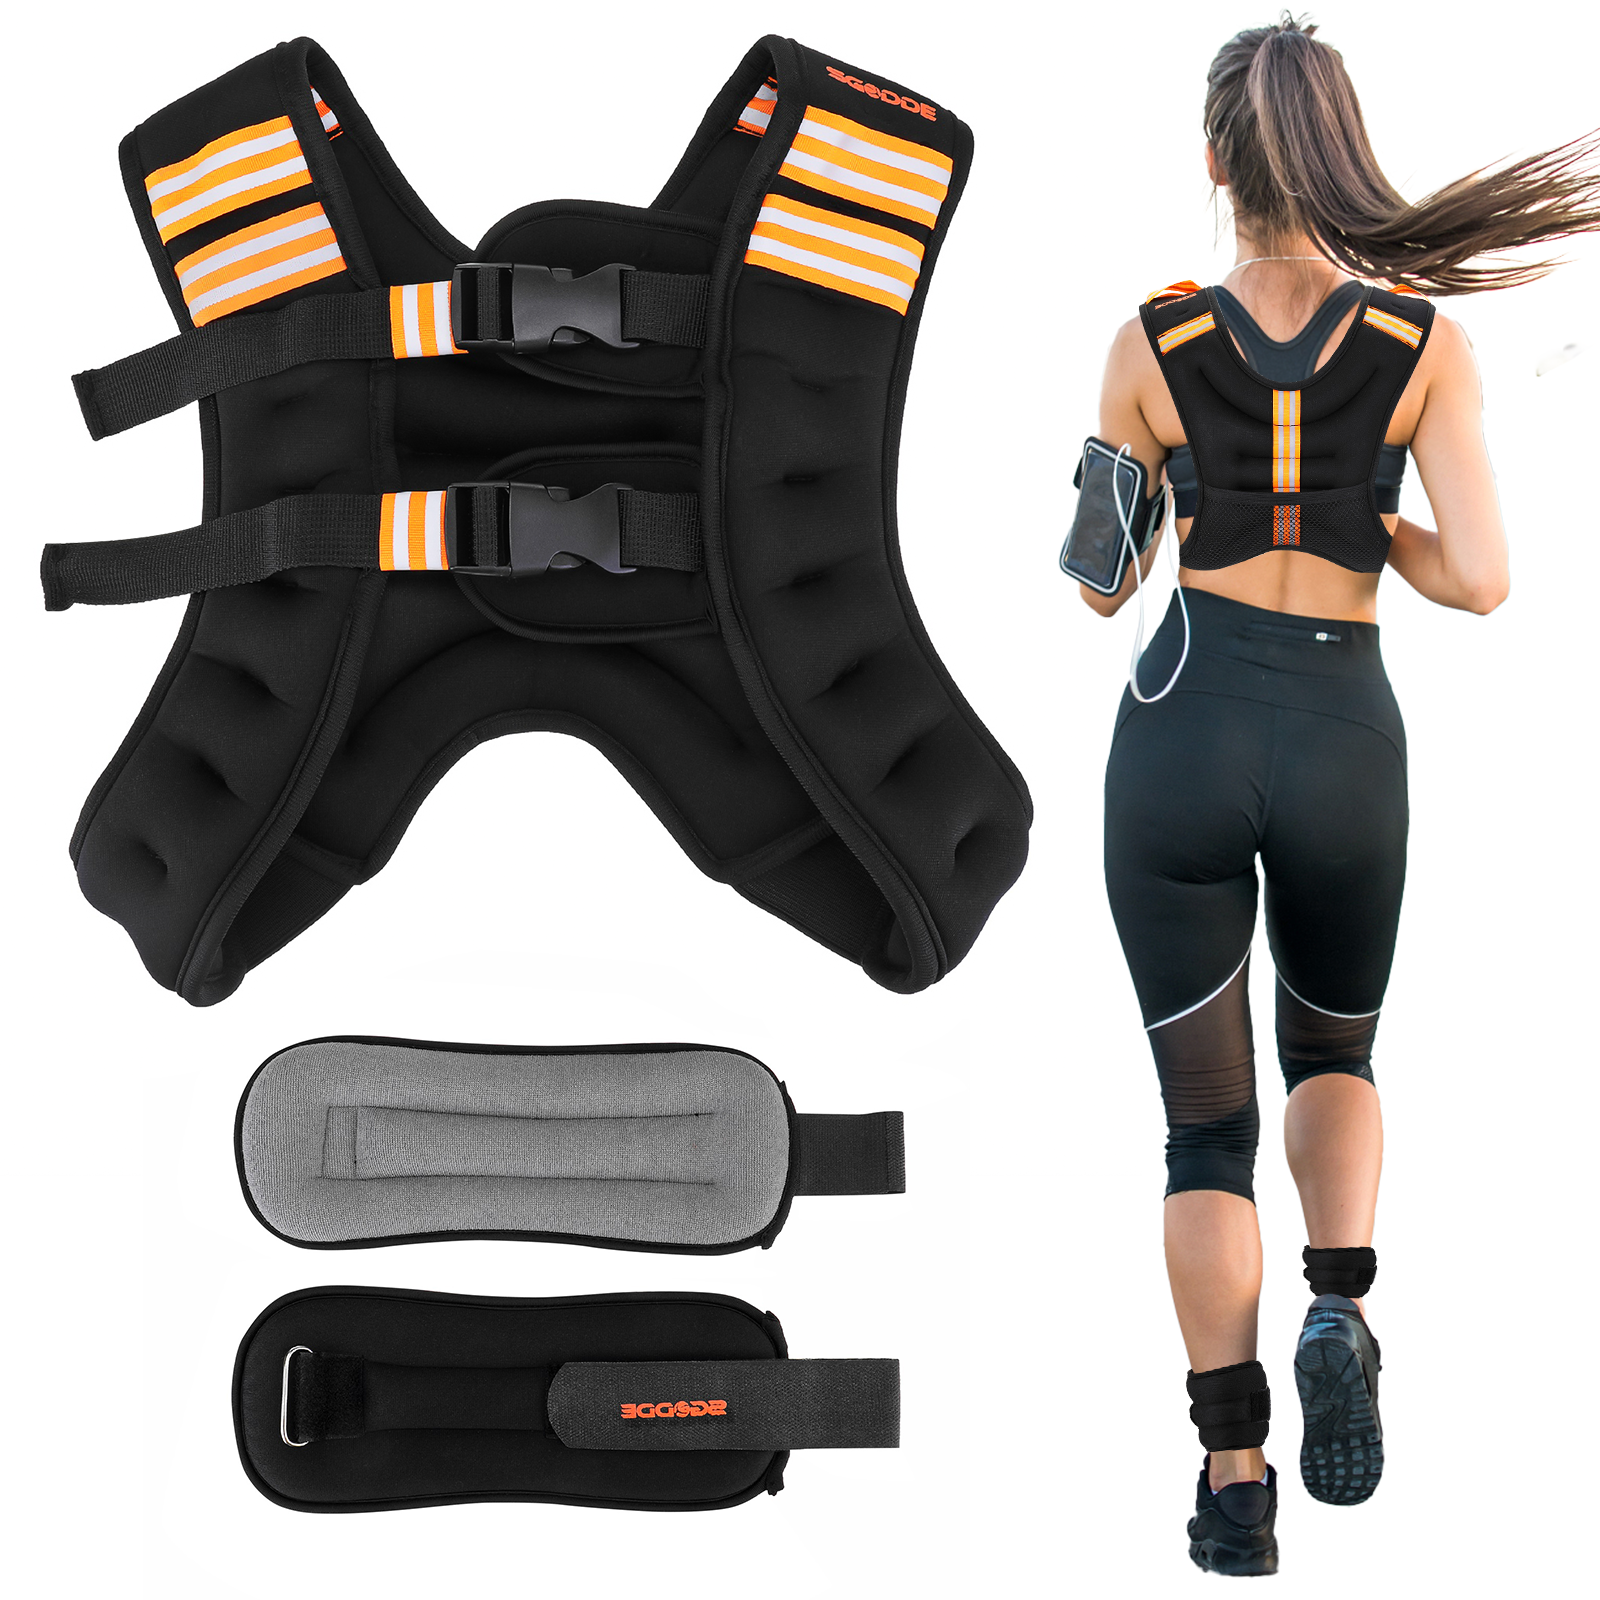 SGODDE Weighted Vest with Reflective Strips Adjustable Weight Vest for Men and Women Strength Traini